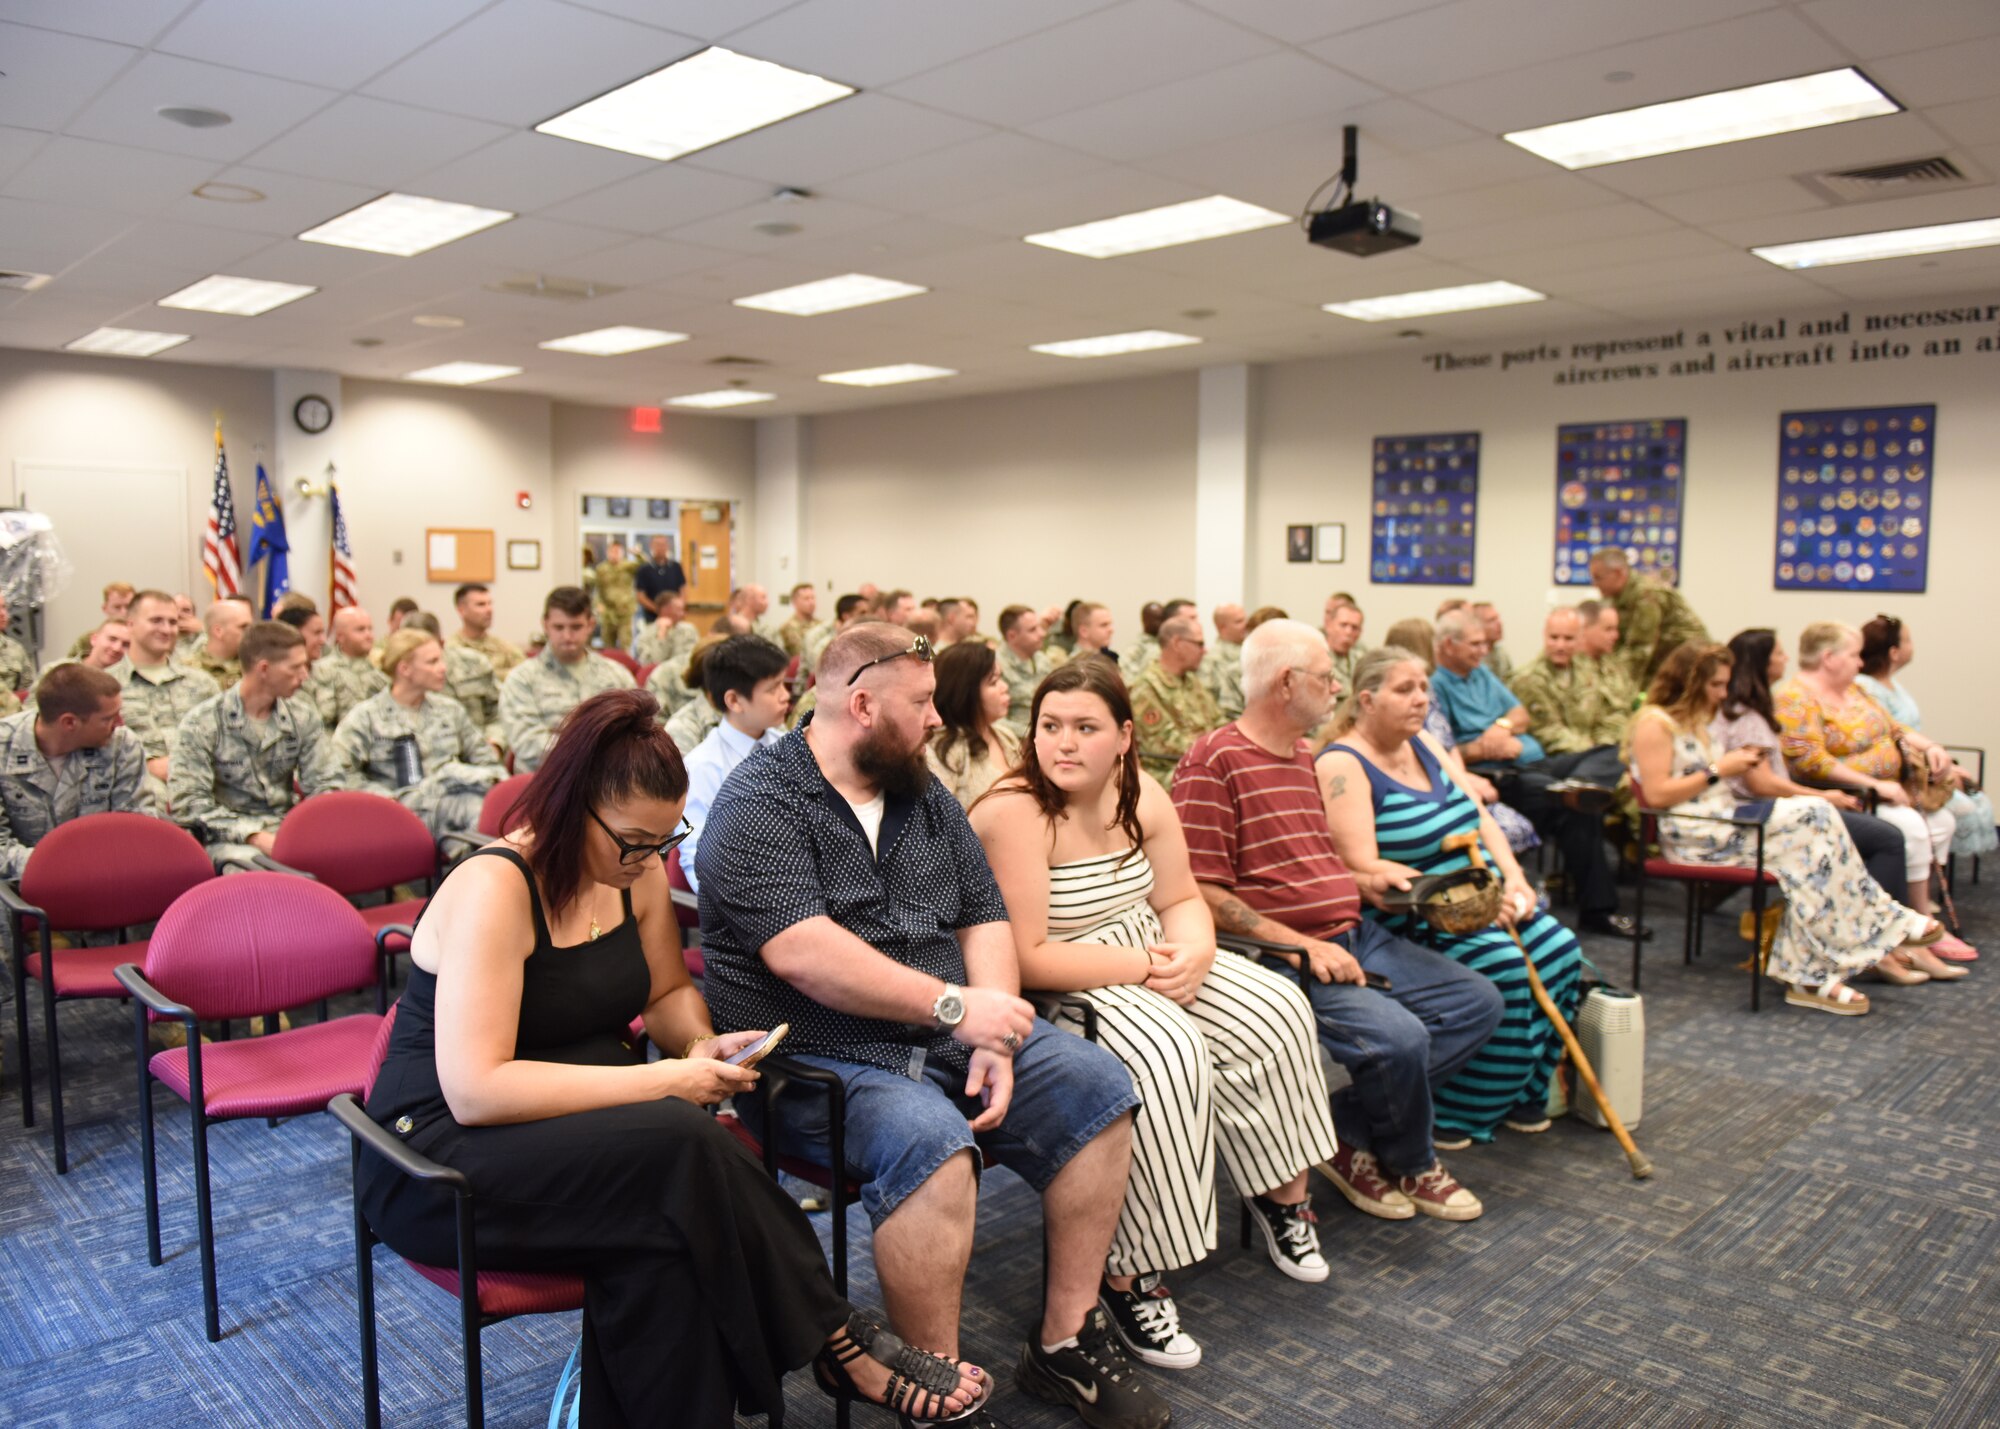 Airmen from the 911th Aircraft Maintenance Squadron, as well as family and friends of Capt. Joseph E. Walters, commander of the 911th Aircraft Maintenance Squadron, attend an assumption of command ceremony at the Pittsburgh International Airport Air Reserve Station, Pennsylvania Aug. 3, 2019.